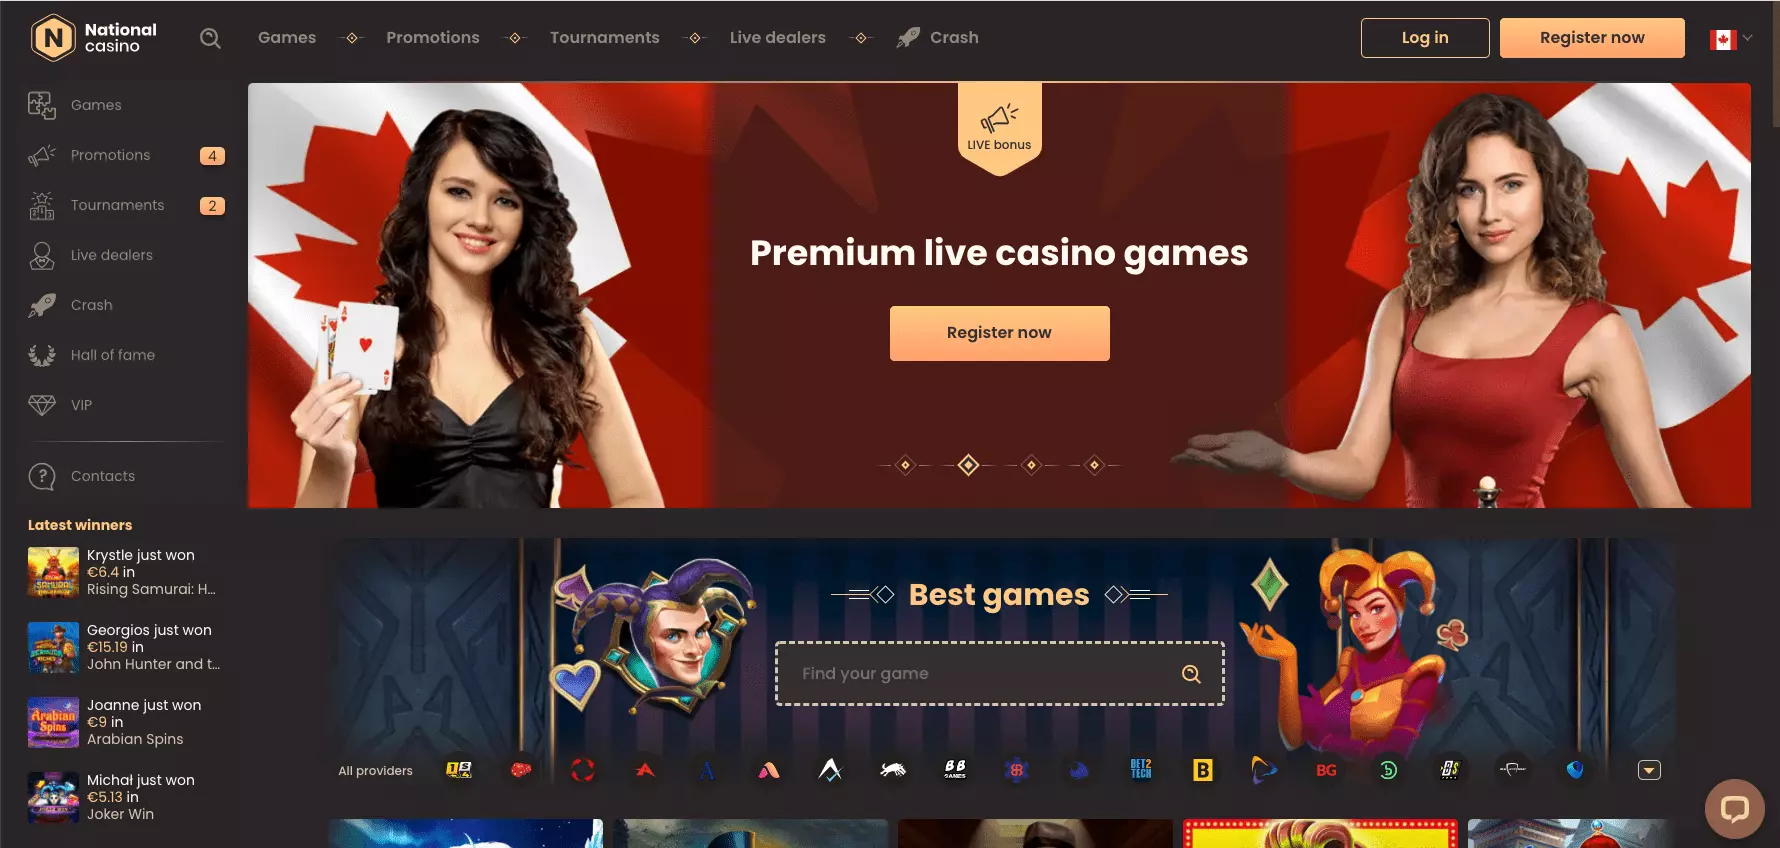 National casino games and home page lobby